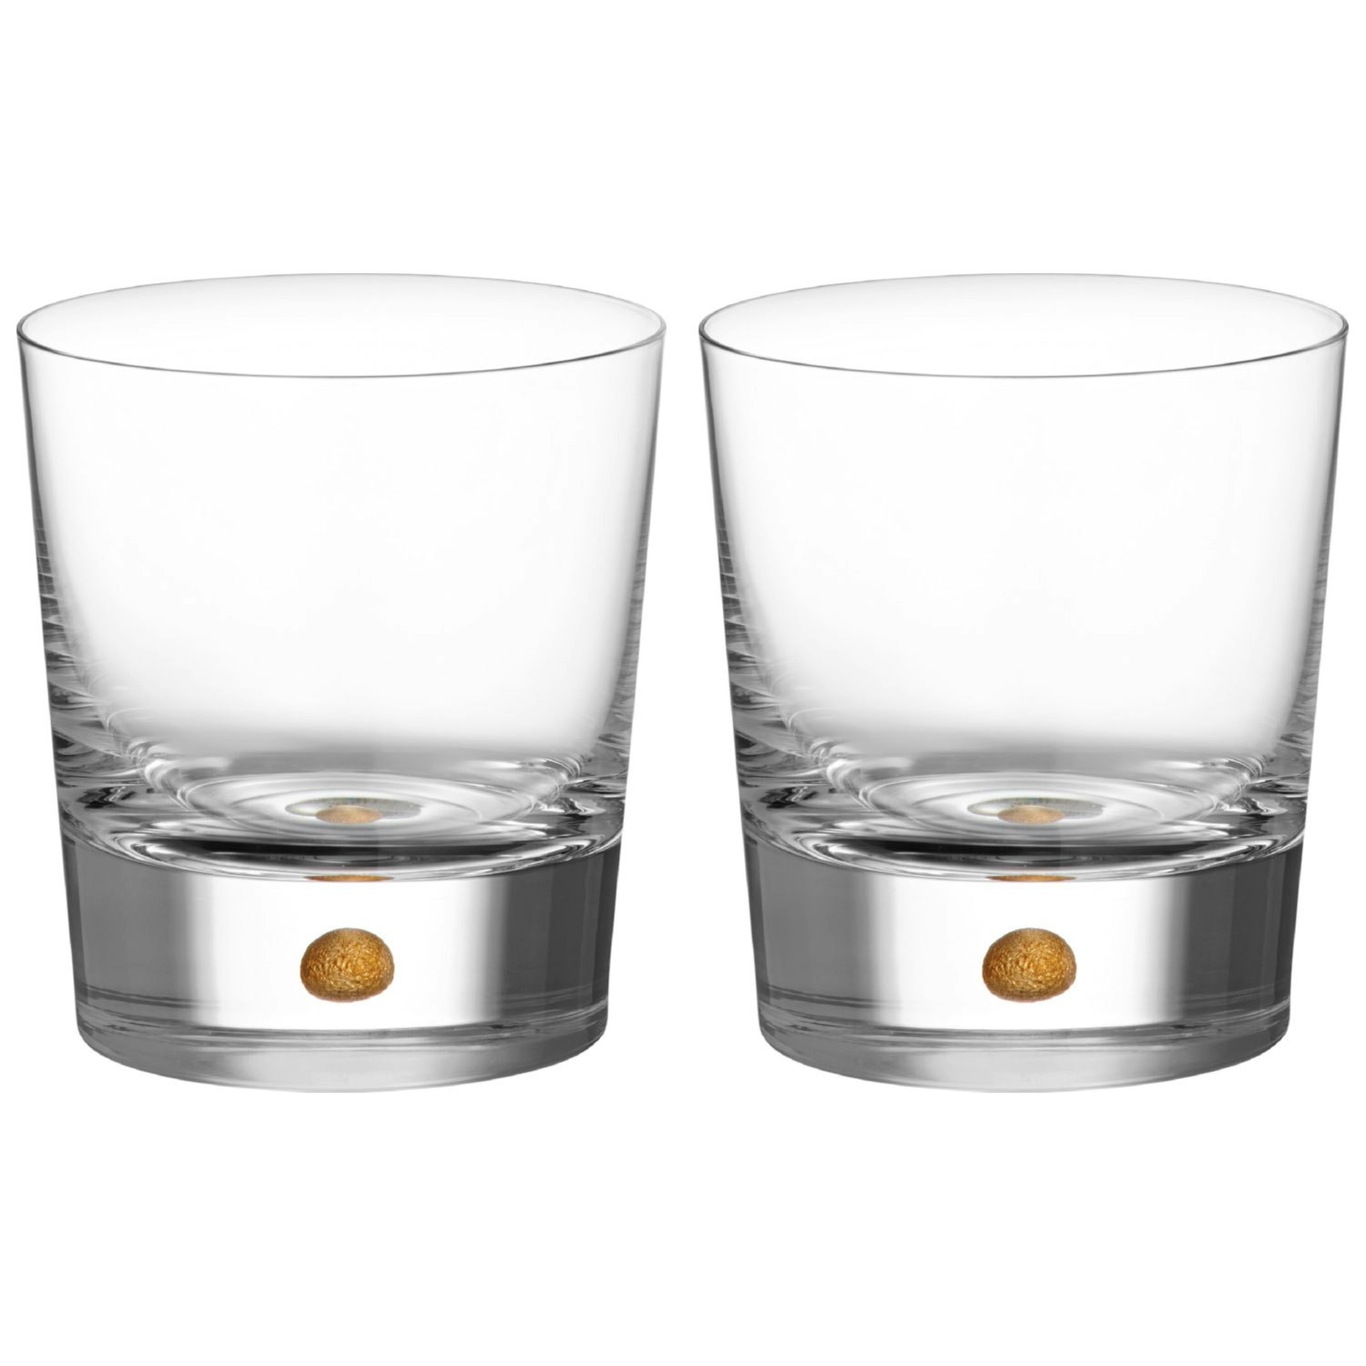 Intermezzo Whiskyglas Double old fashioned 2-er Set 40 cl, Gold